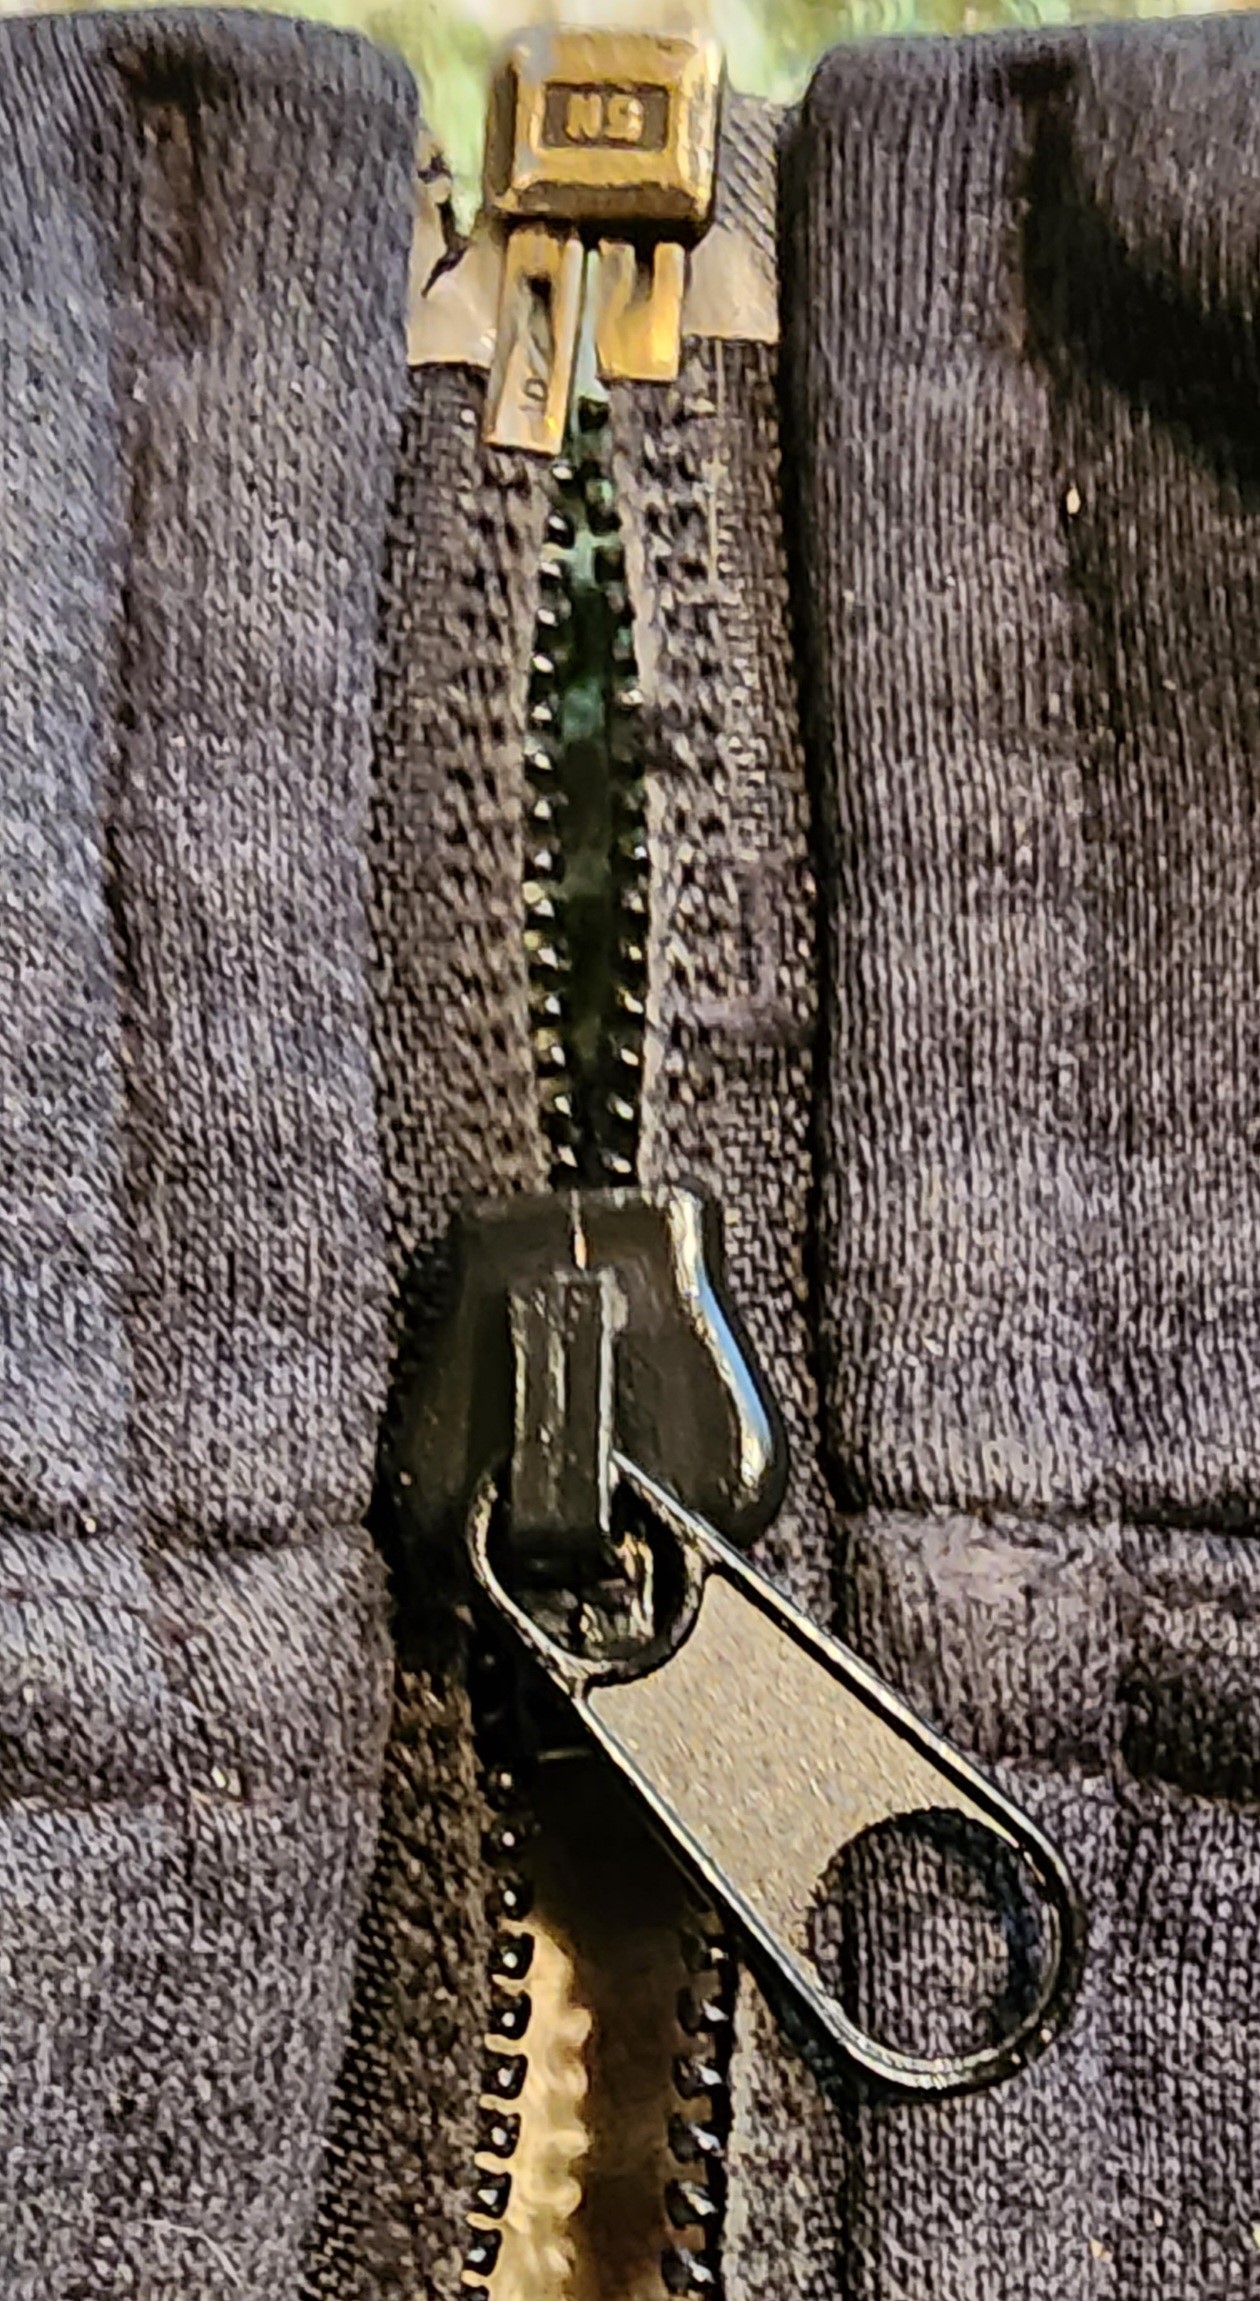 Failure to connect the two sides of the zipper